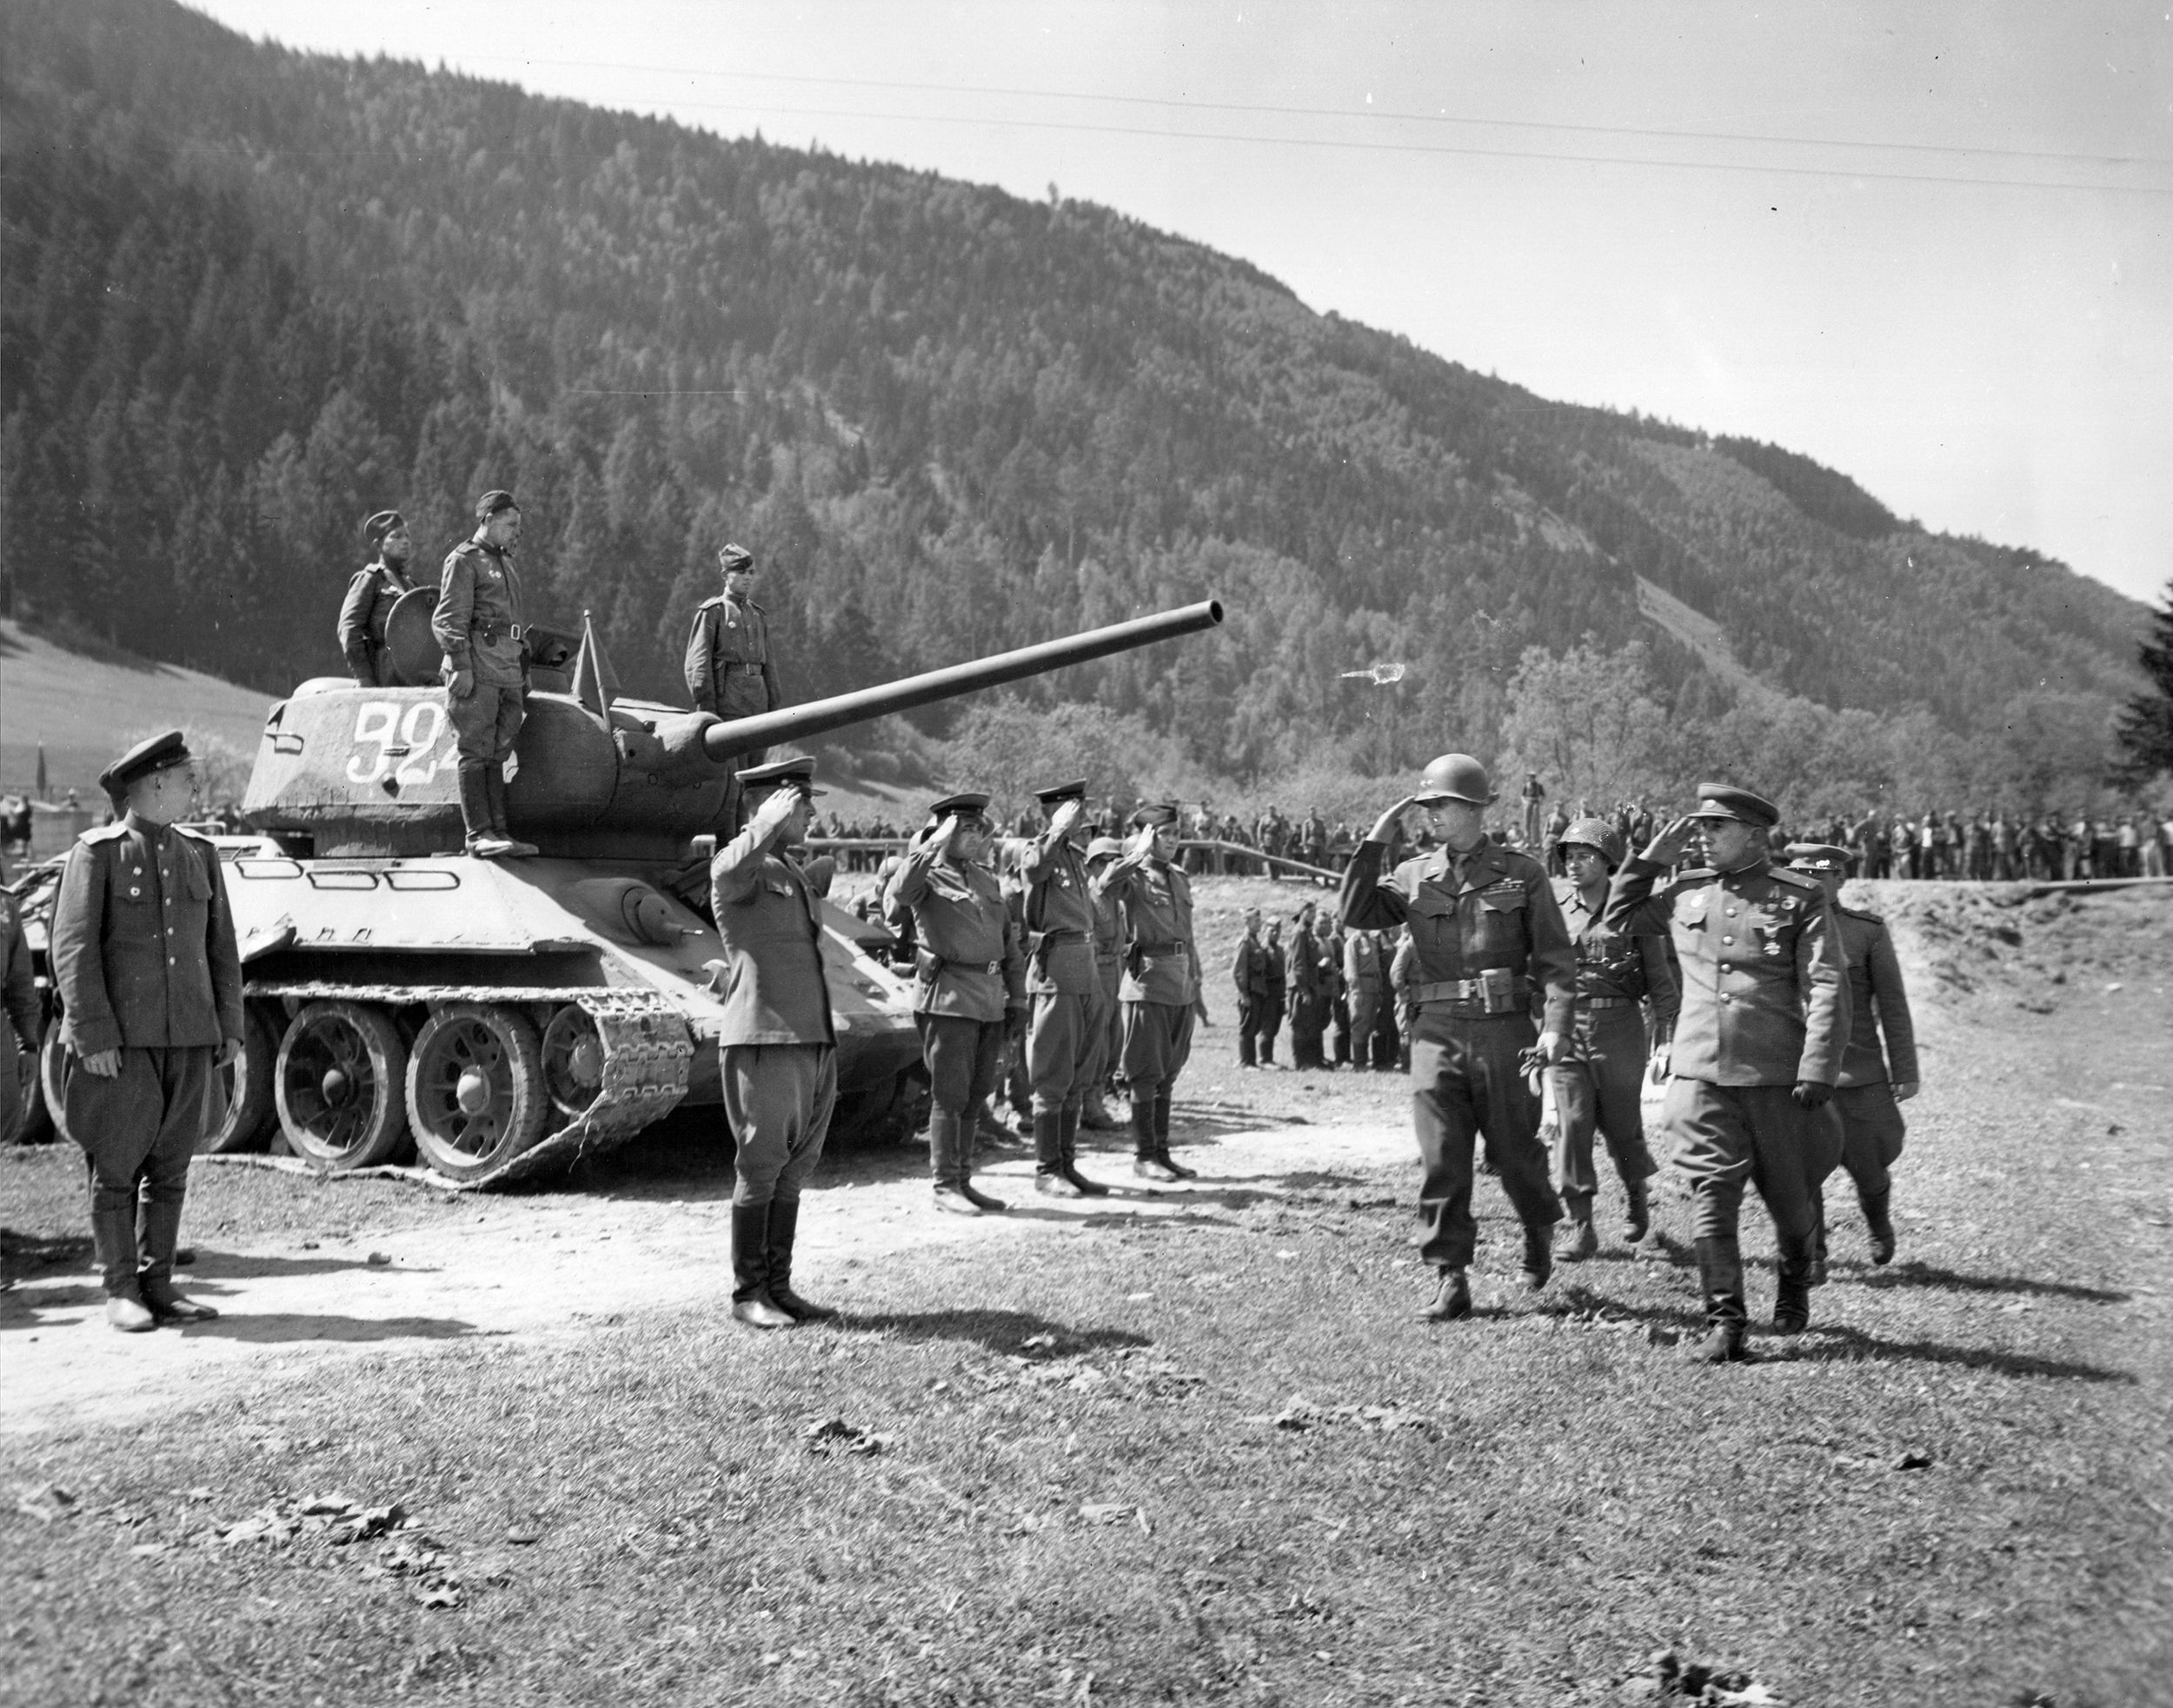 General Horace McBride, commander of the 80th Infantry Division, and Major General Pavel Voskresensky of the Red Army 21st Rifle Division inspect a Soviet unit near the town of Liezen, Austria, along the Enns River on May 11, 1945. This photo was taken just three days after the end of World War II in Europe.